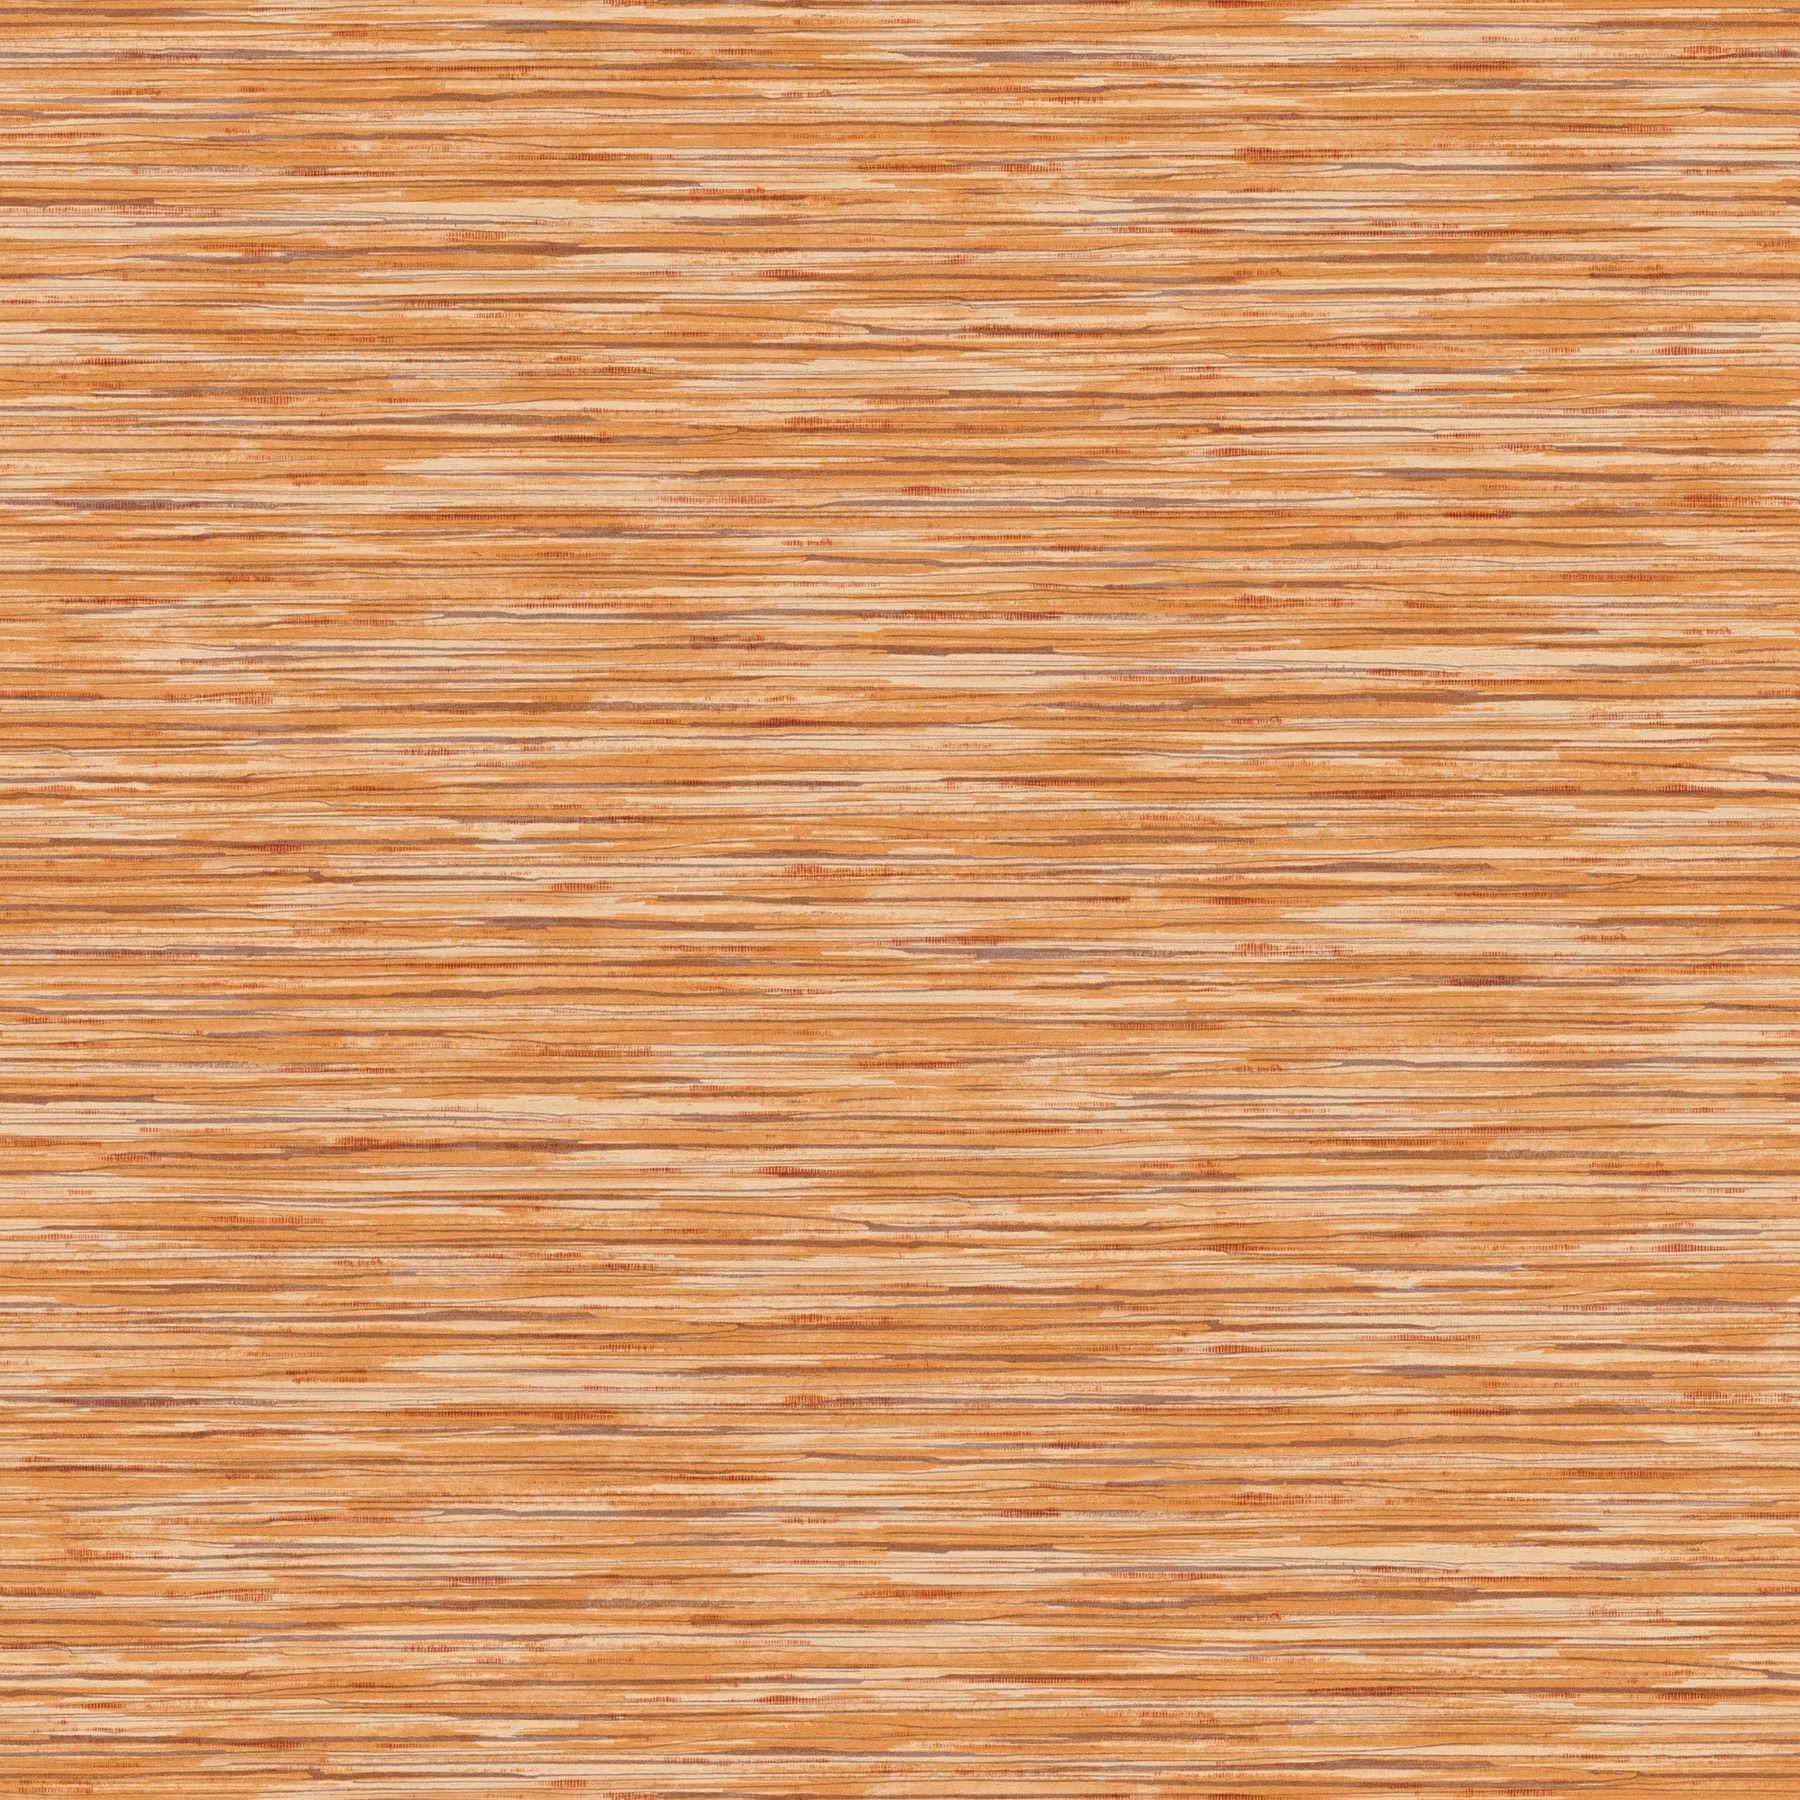 Non-woven wallpaper mottled with colour pattern - orange, brown
